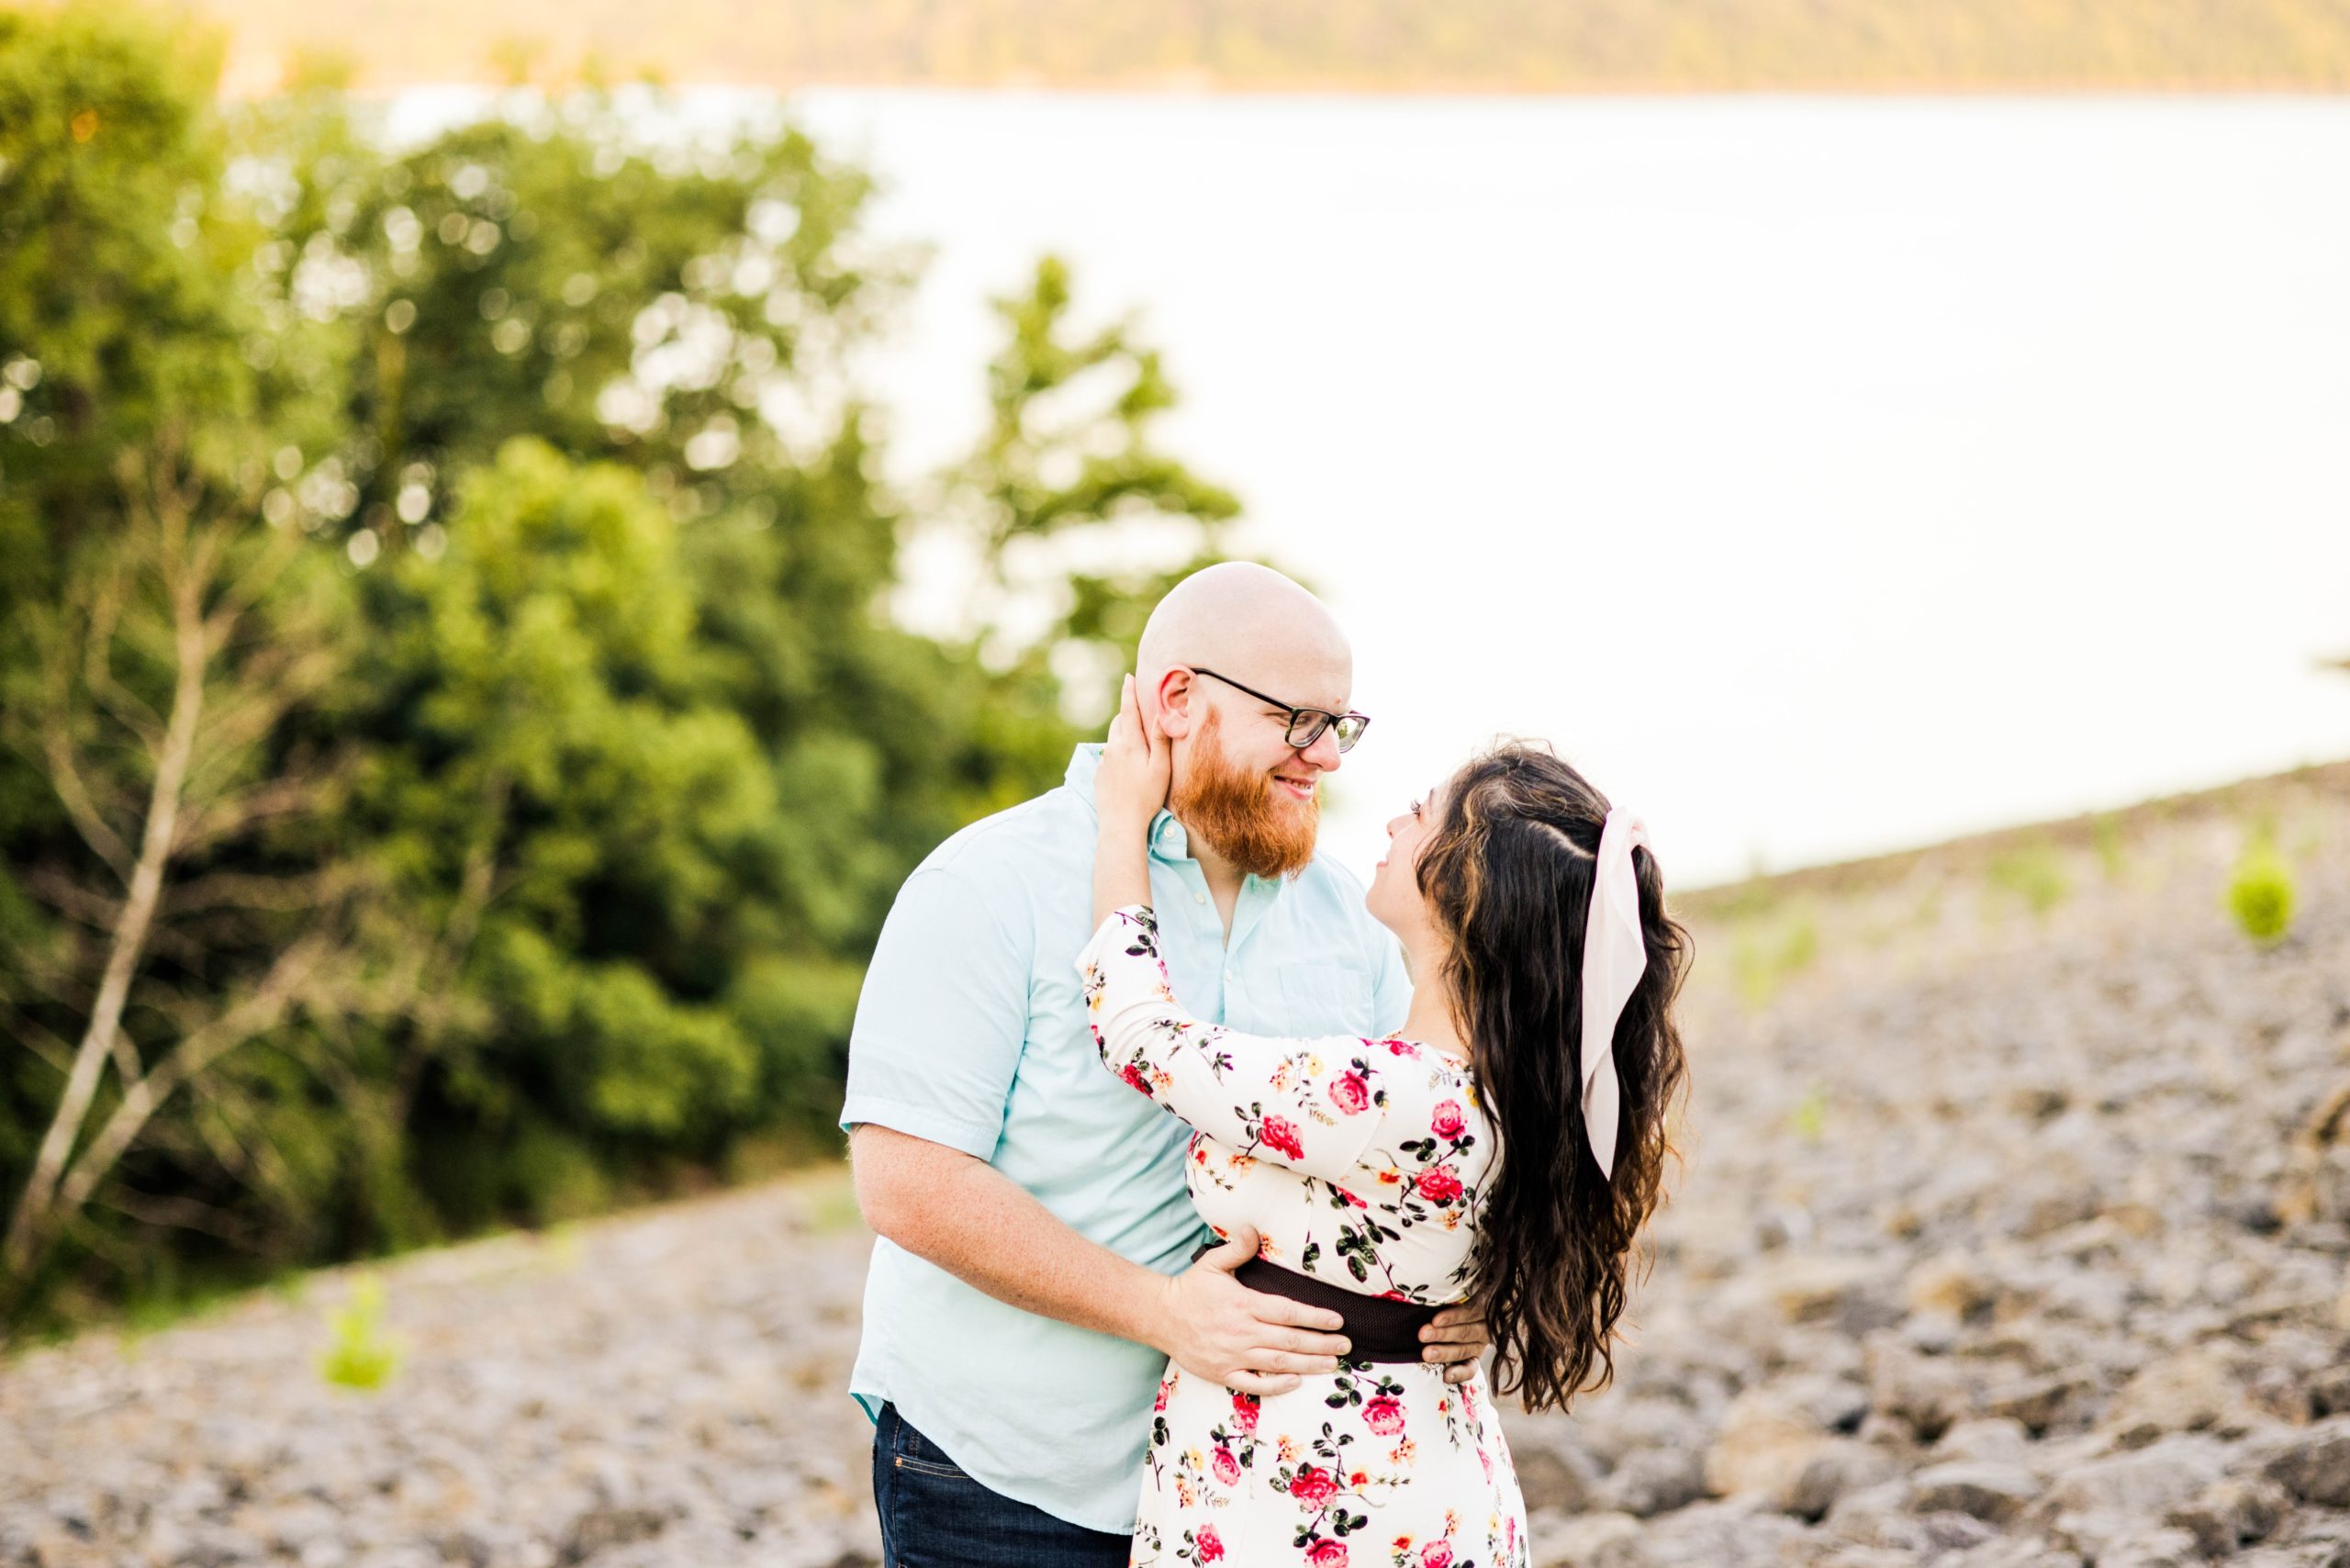 Jessica and Sam are looking at each other during their summer engagement photos on the side of a lake in a rock field at sunset time at a local park outside of Cincinnati OH